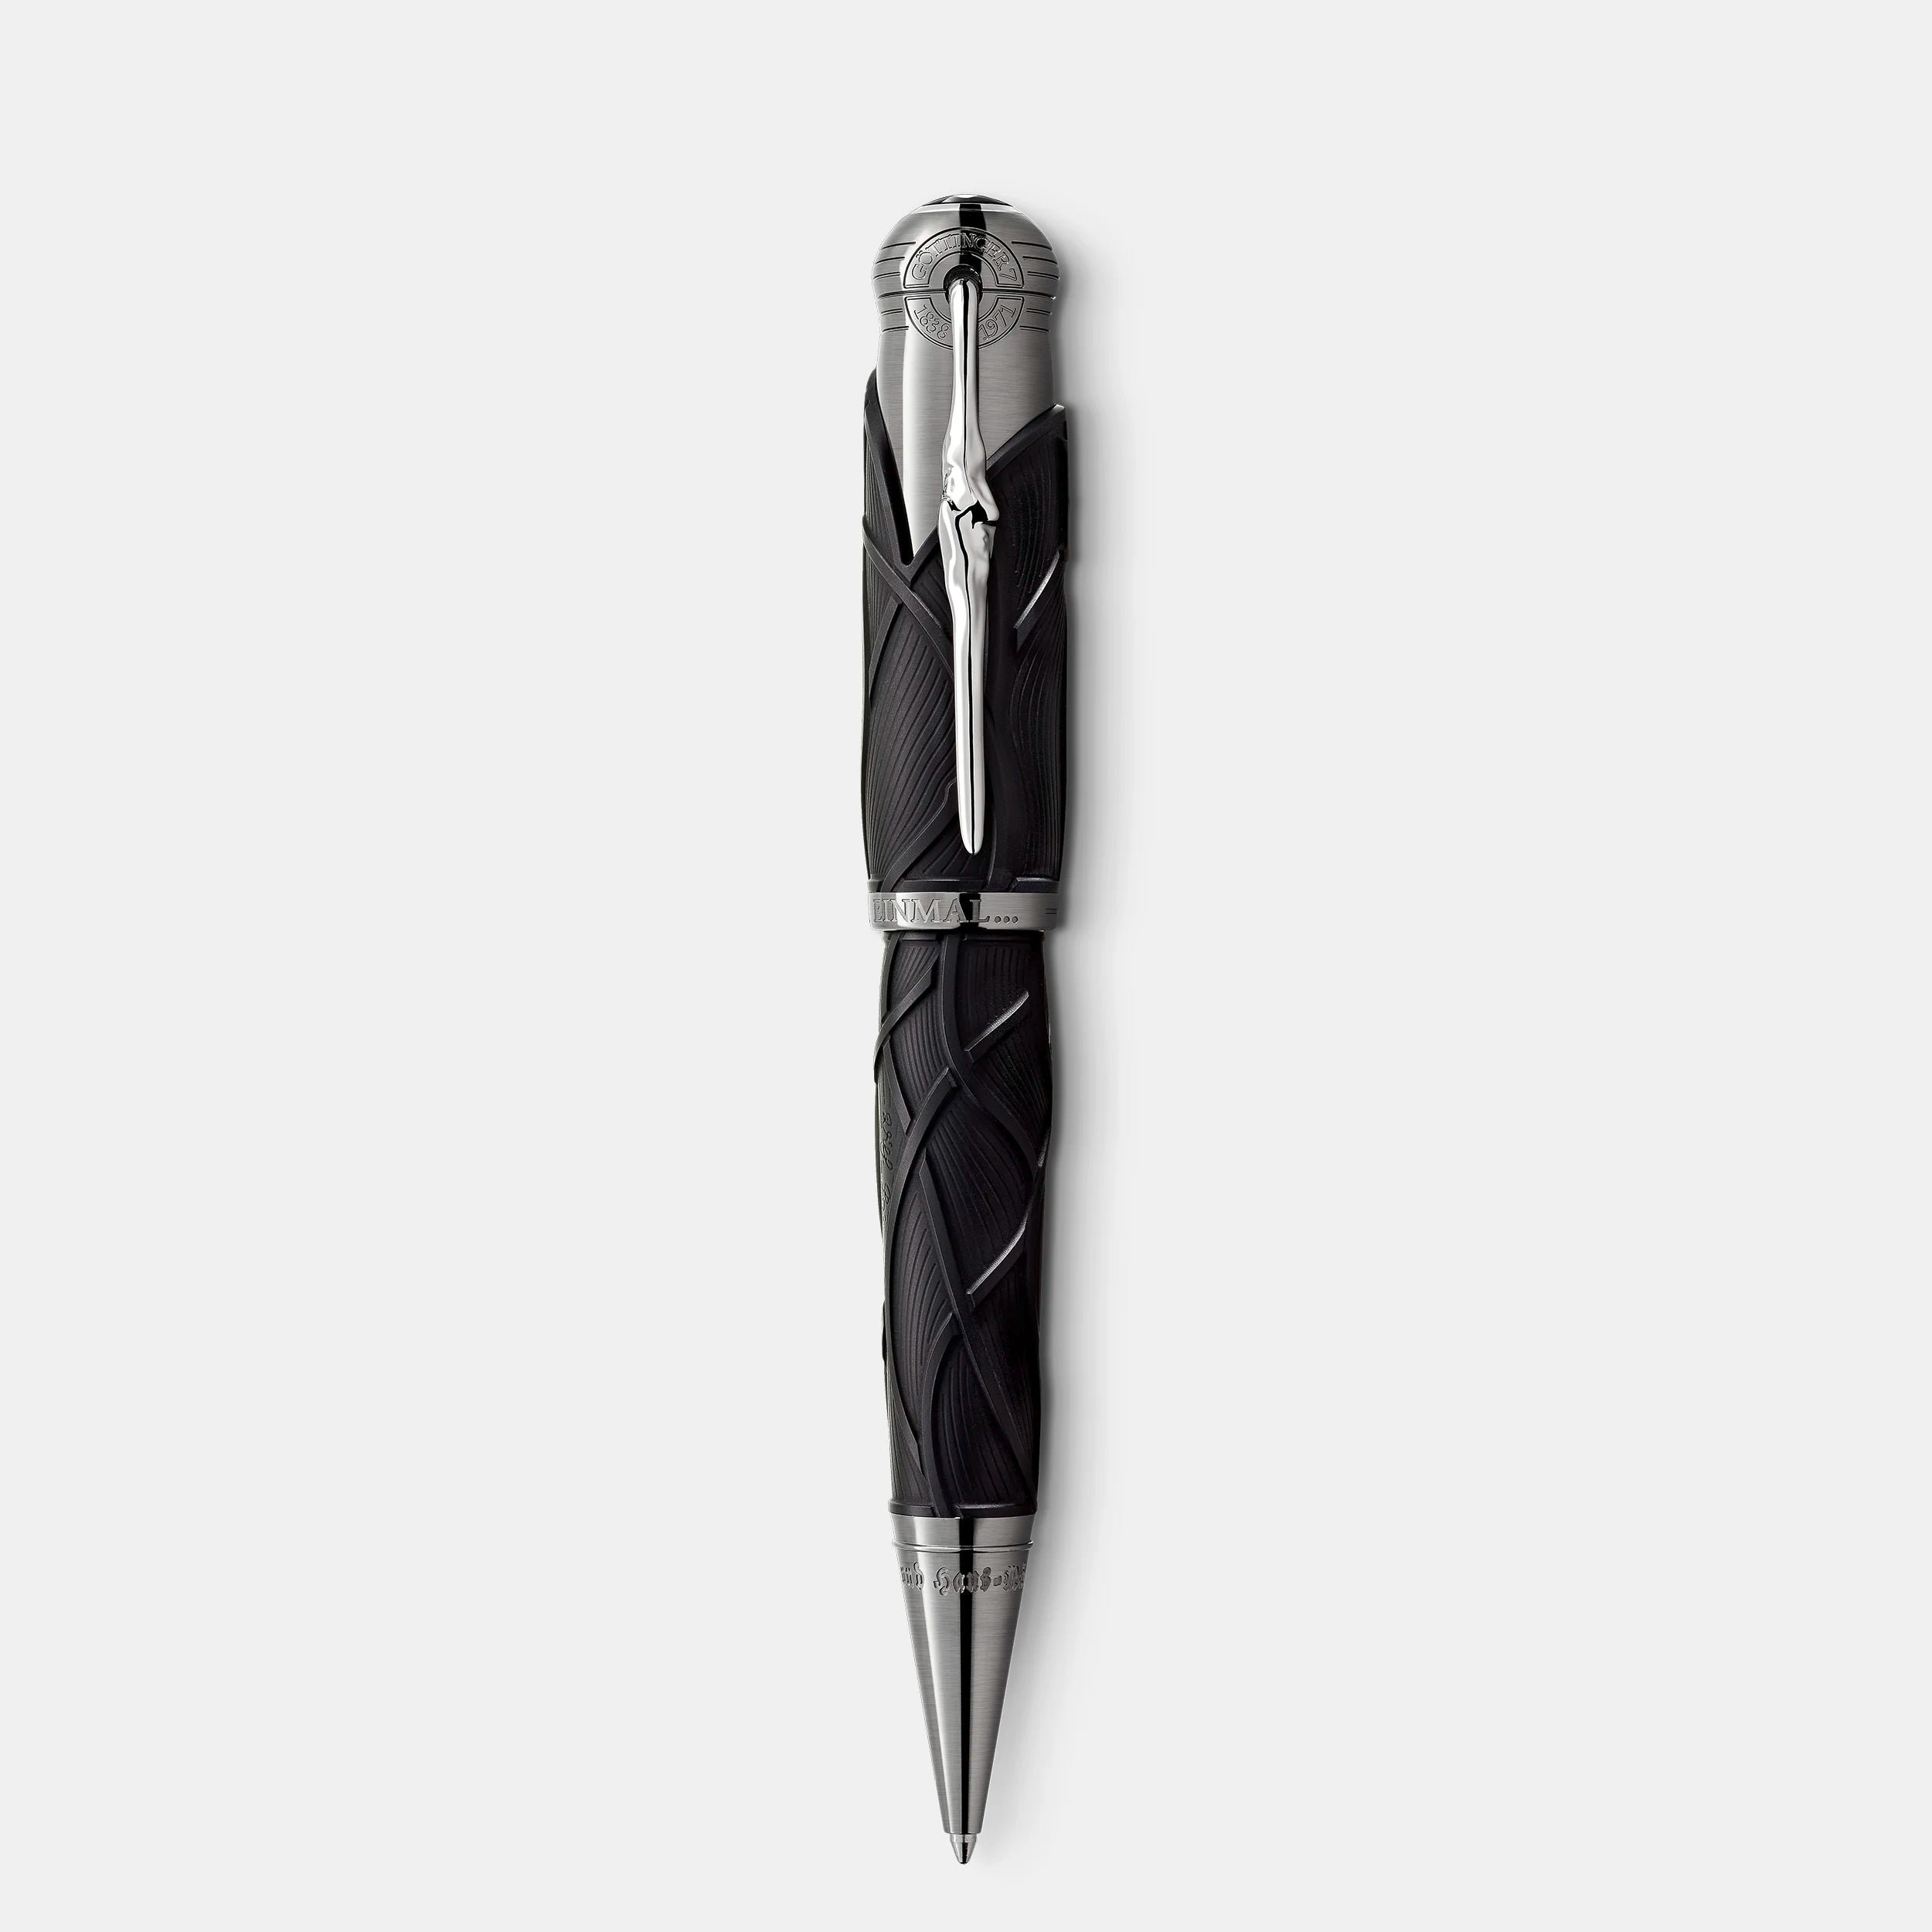 MONTBLANC | Penna a sfera Writers Edition Homage to Brothers Grimm Edizione Limitata | MB128364 *